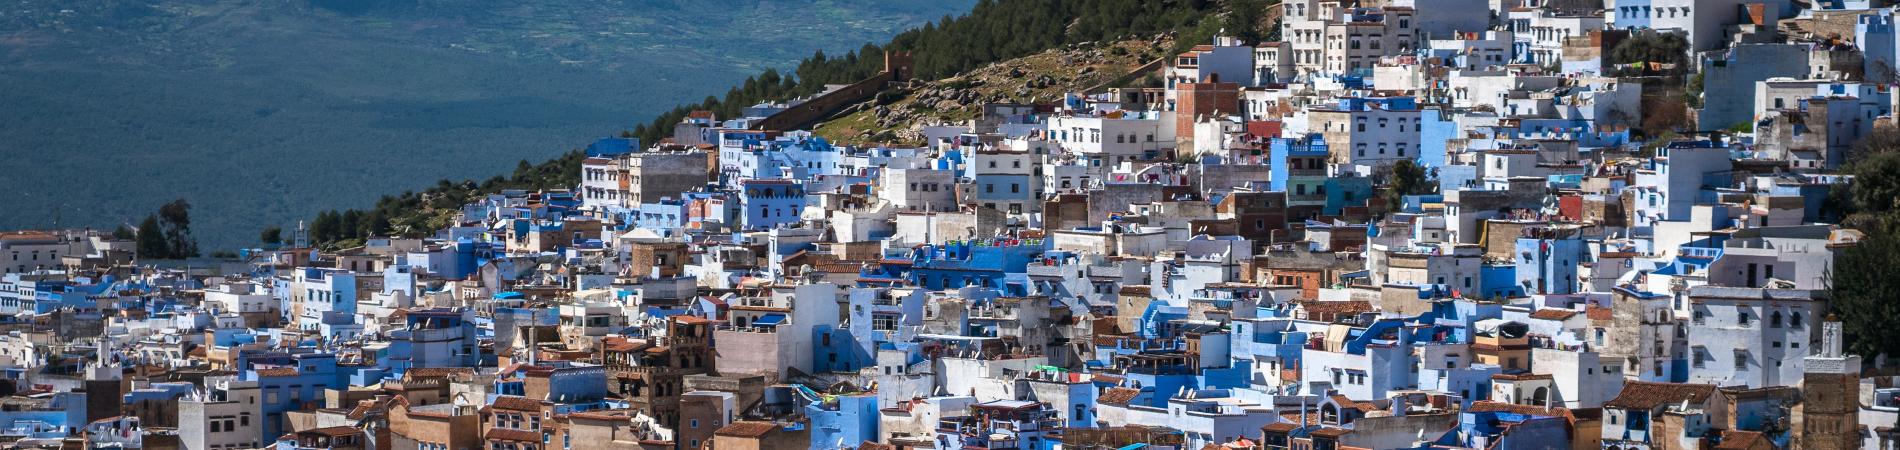 Image for Chefchaouen – Morocco’s Blue City